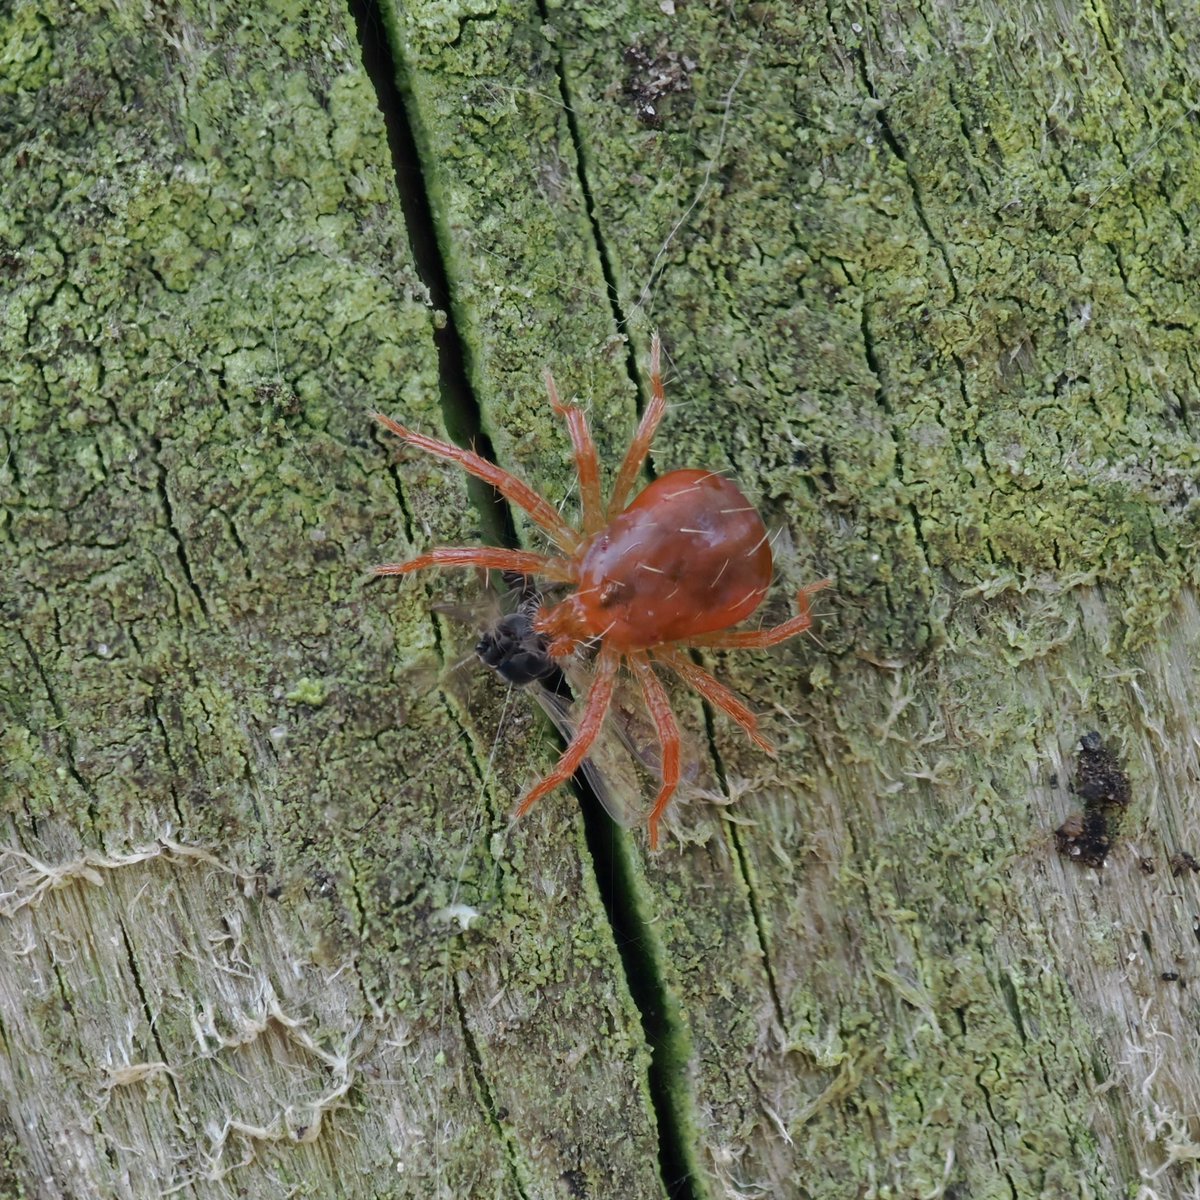 Another member of the #FencePostWildlife community. A tiny red mite of around 1mm long. An Anystis species we think. The two that we saw were on adjacent posts, the first trying to look scary, and the second having a dipteran snack. #mites